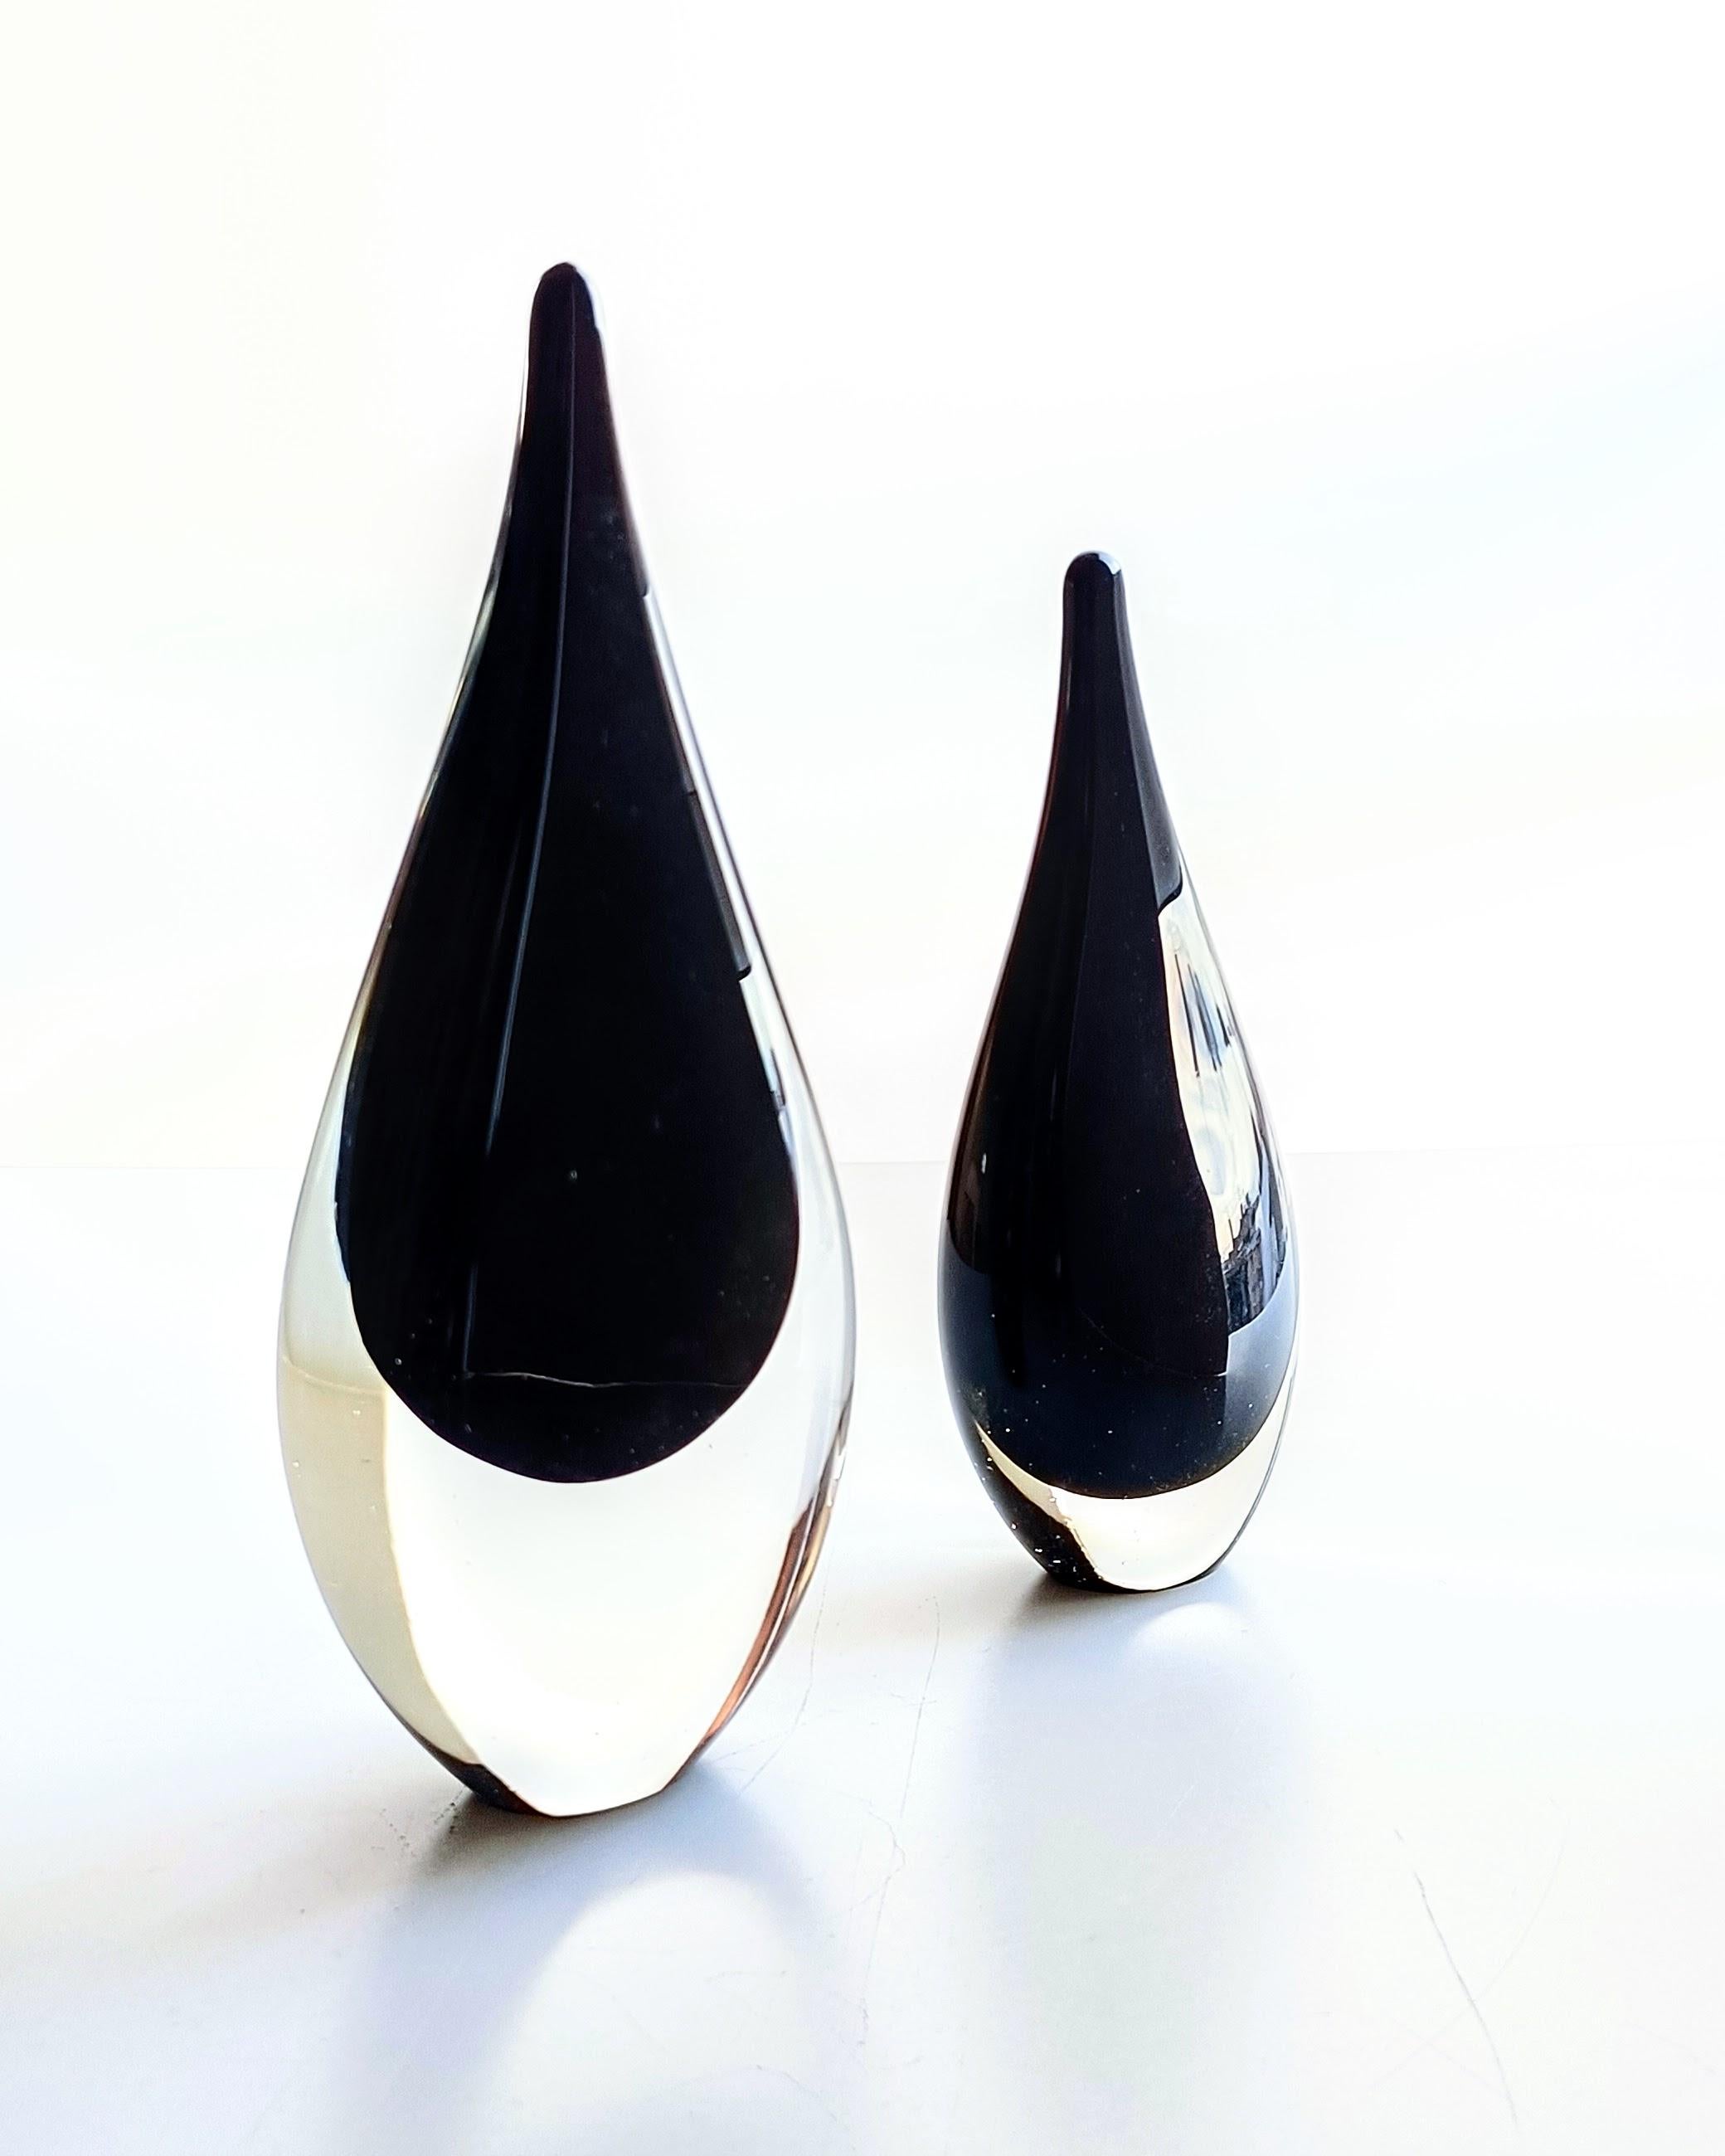 Hand-Crafted Vintage Italian Art Glass Minimalist Murano Sommerso Teardrop Sculptures, 1950s  For Sale